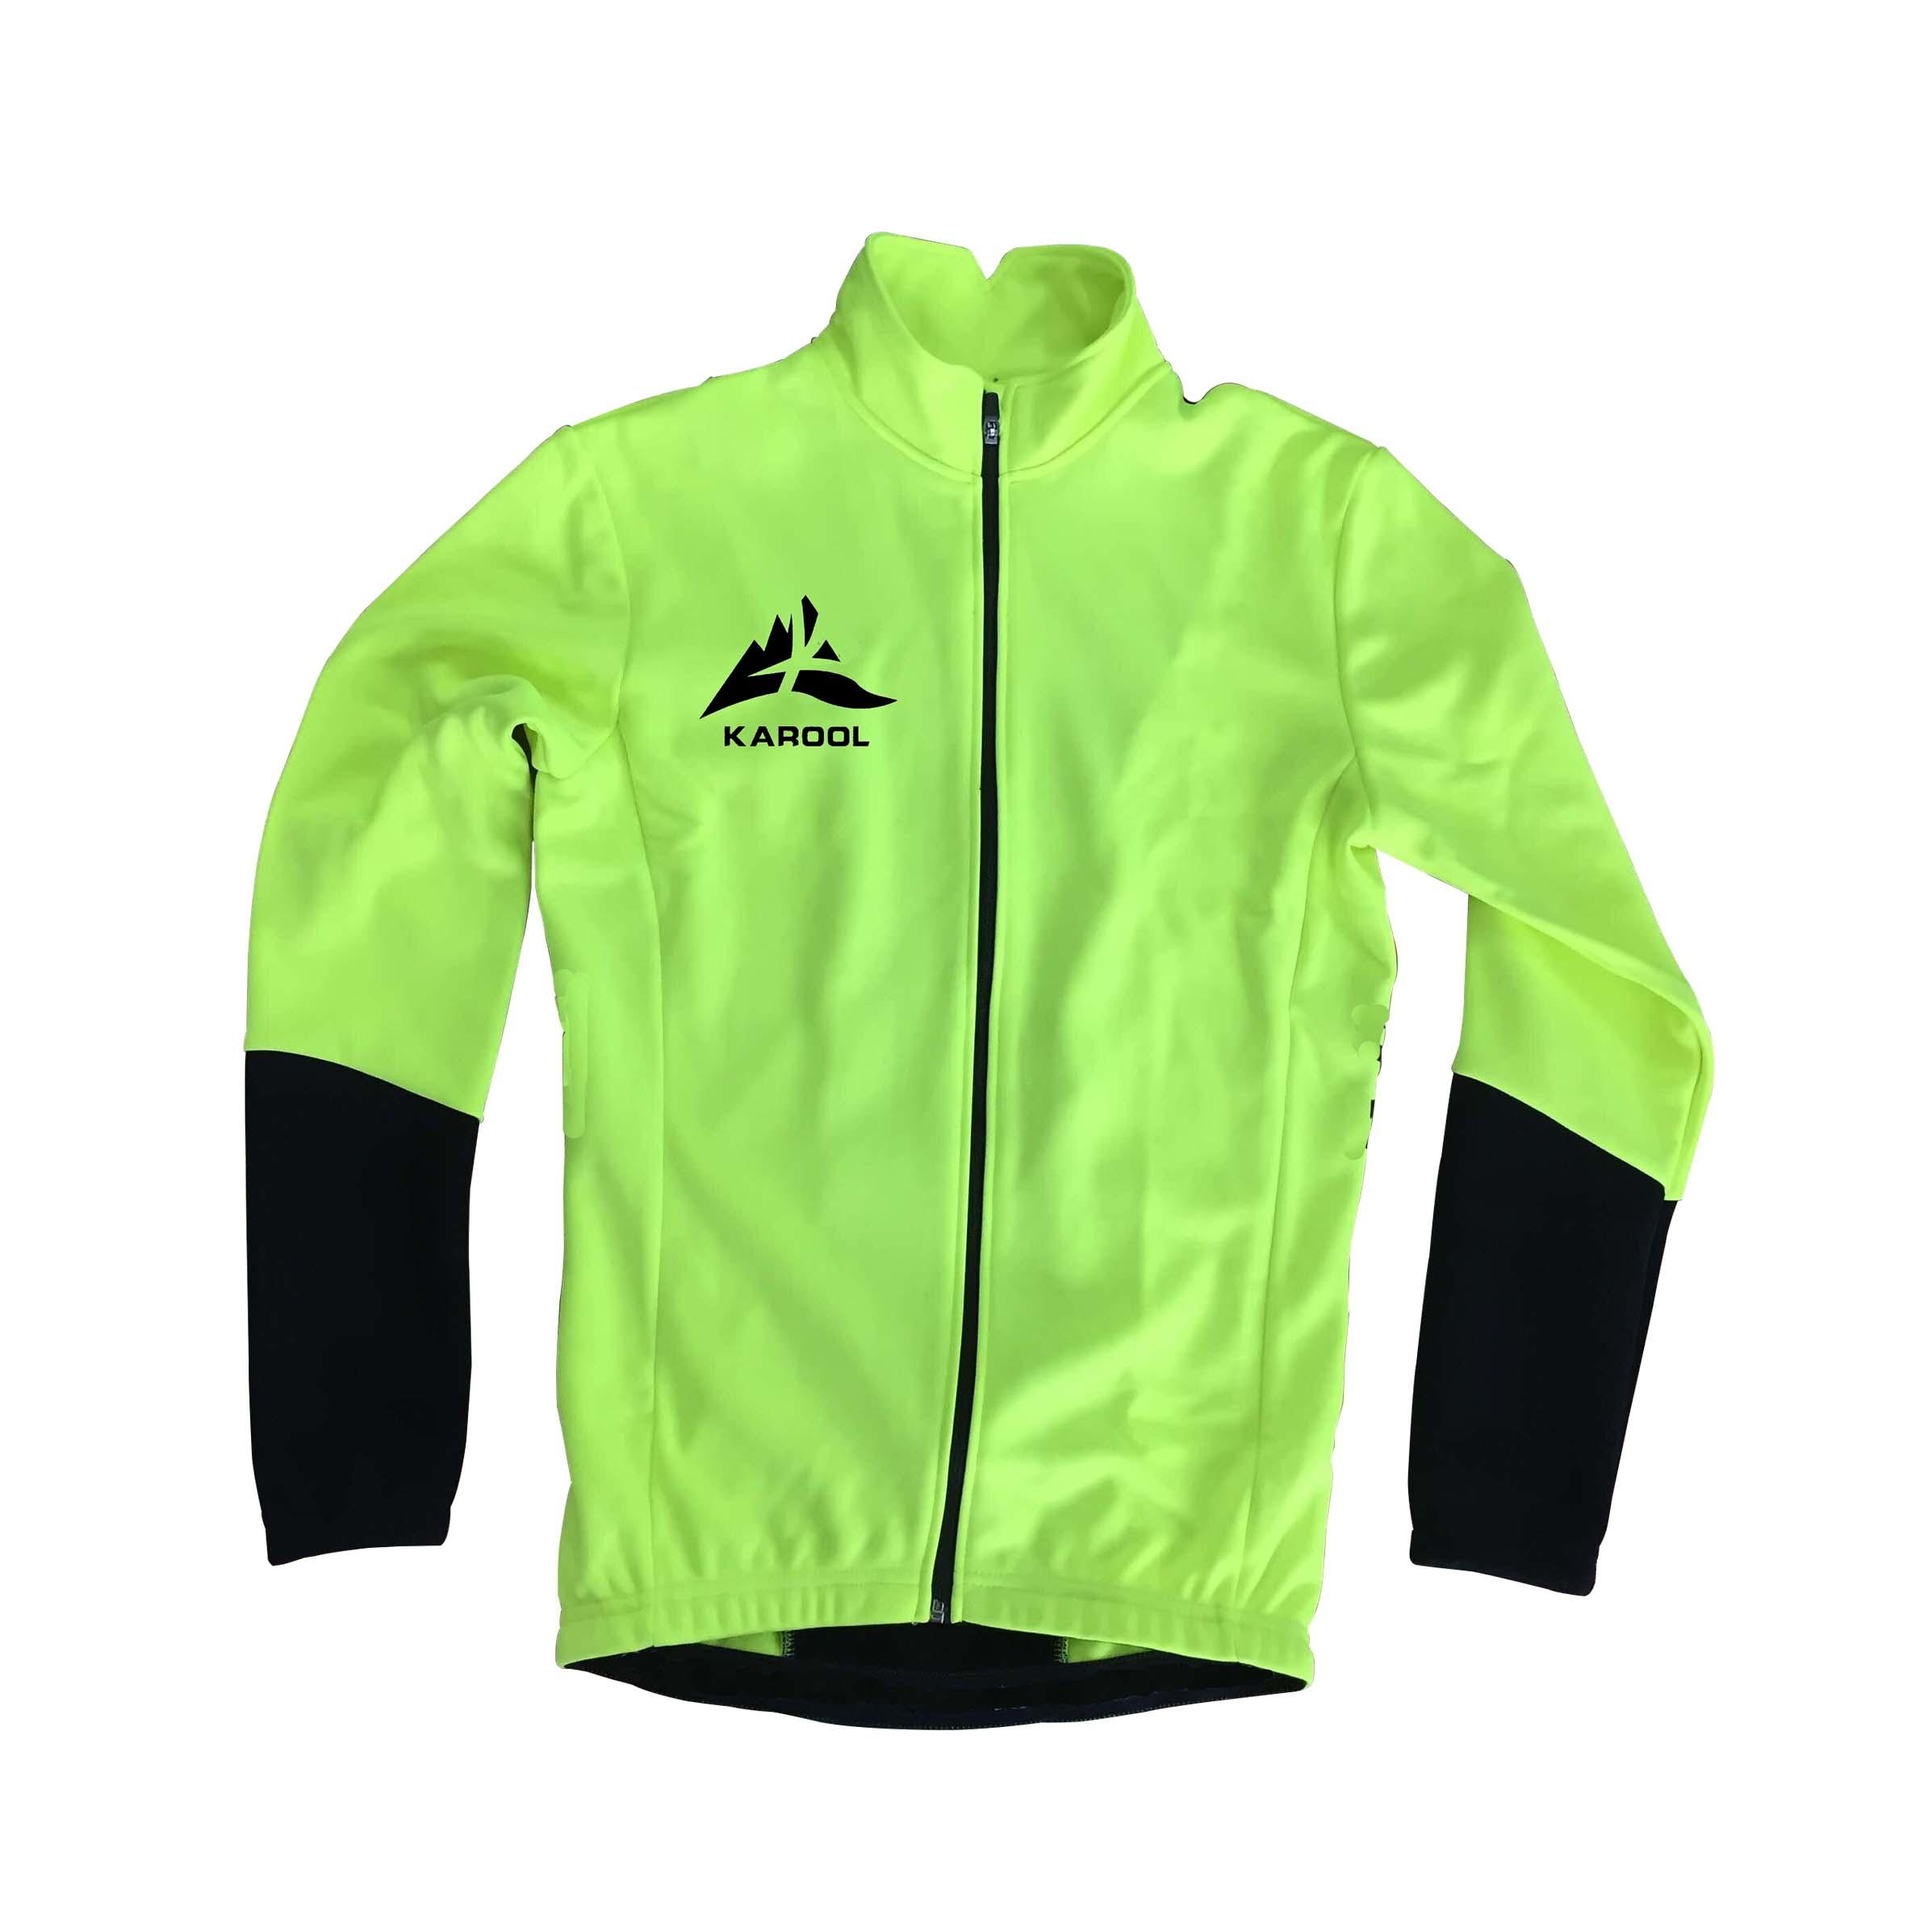 Karool bike riding jackets with good price for children-3